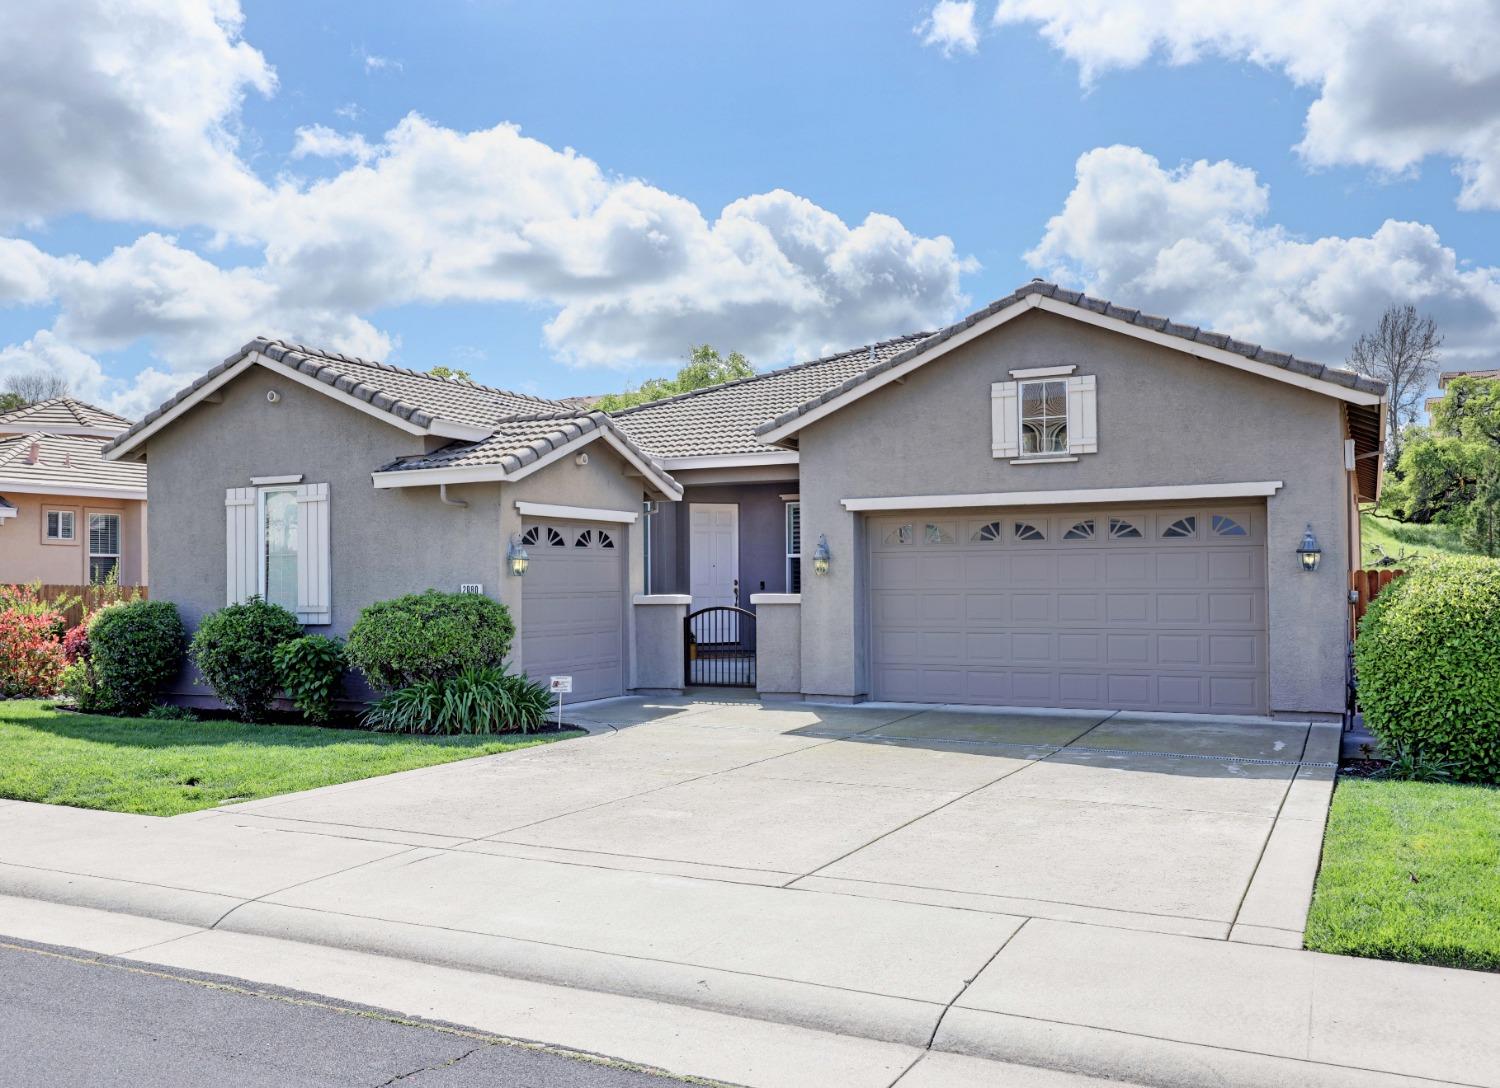 Photo of 2080 Petruchio Wy in Roseville, CA